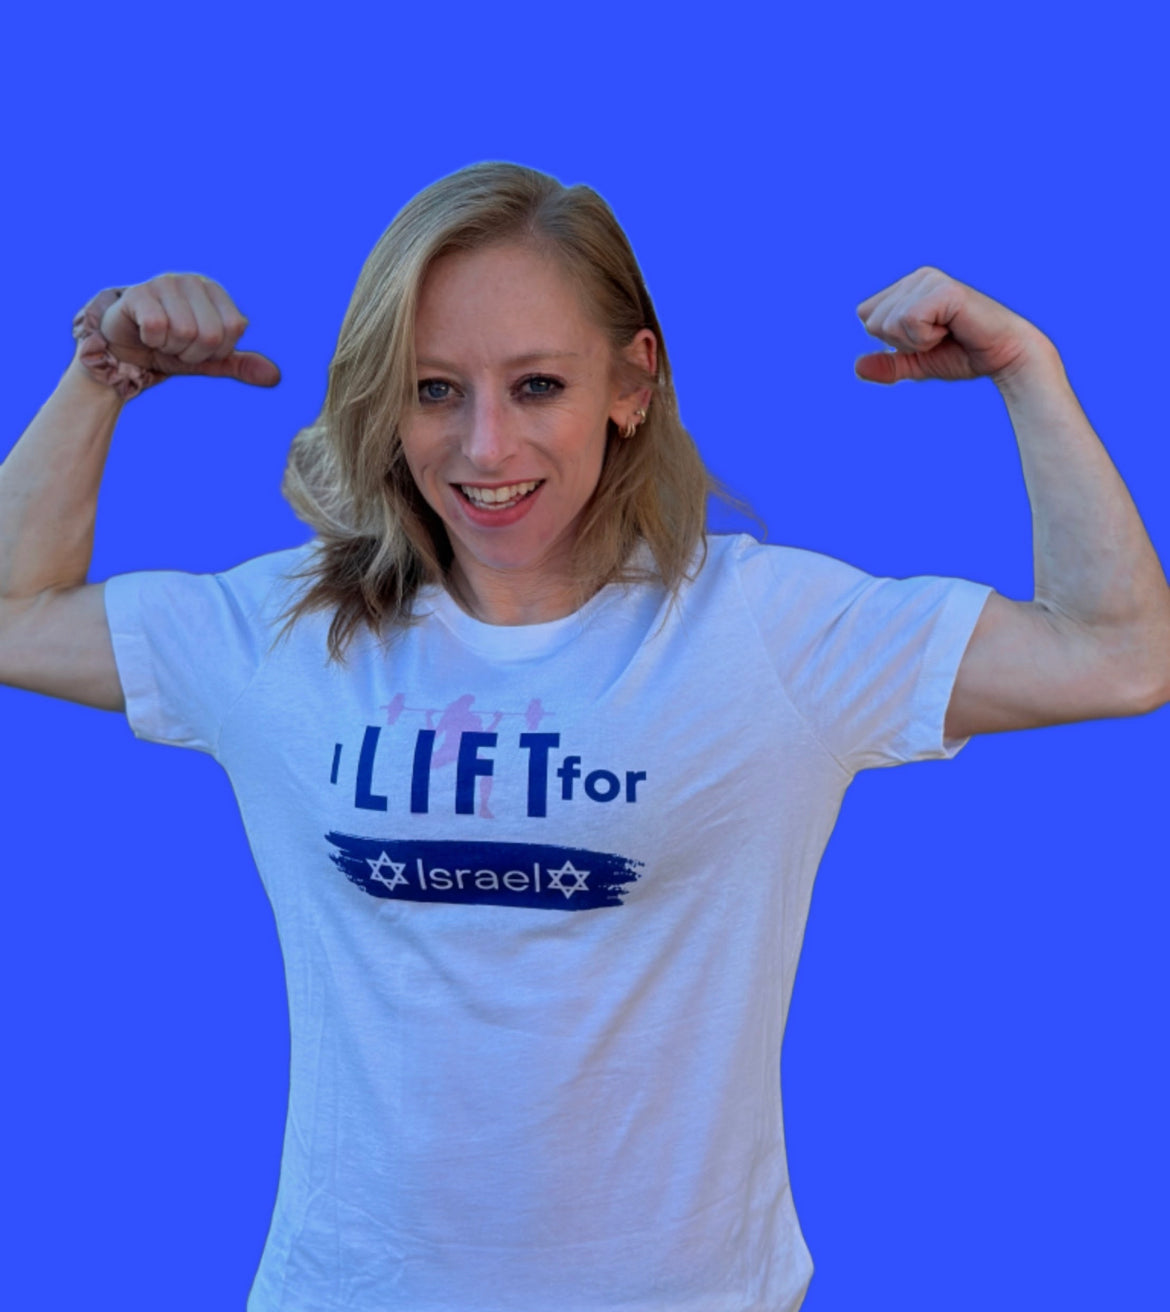 I LIFT FOR ISRAEL- Women’s short sleeves shirt limited edition with #StrongerTogether back print